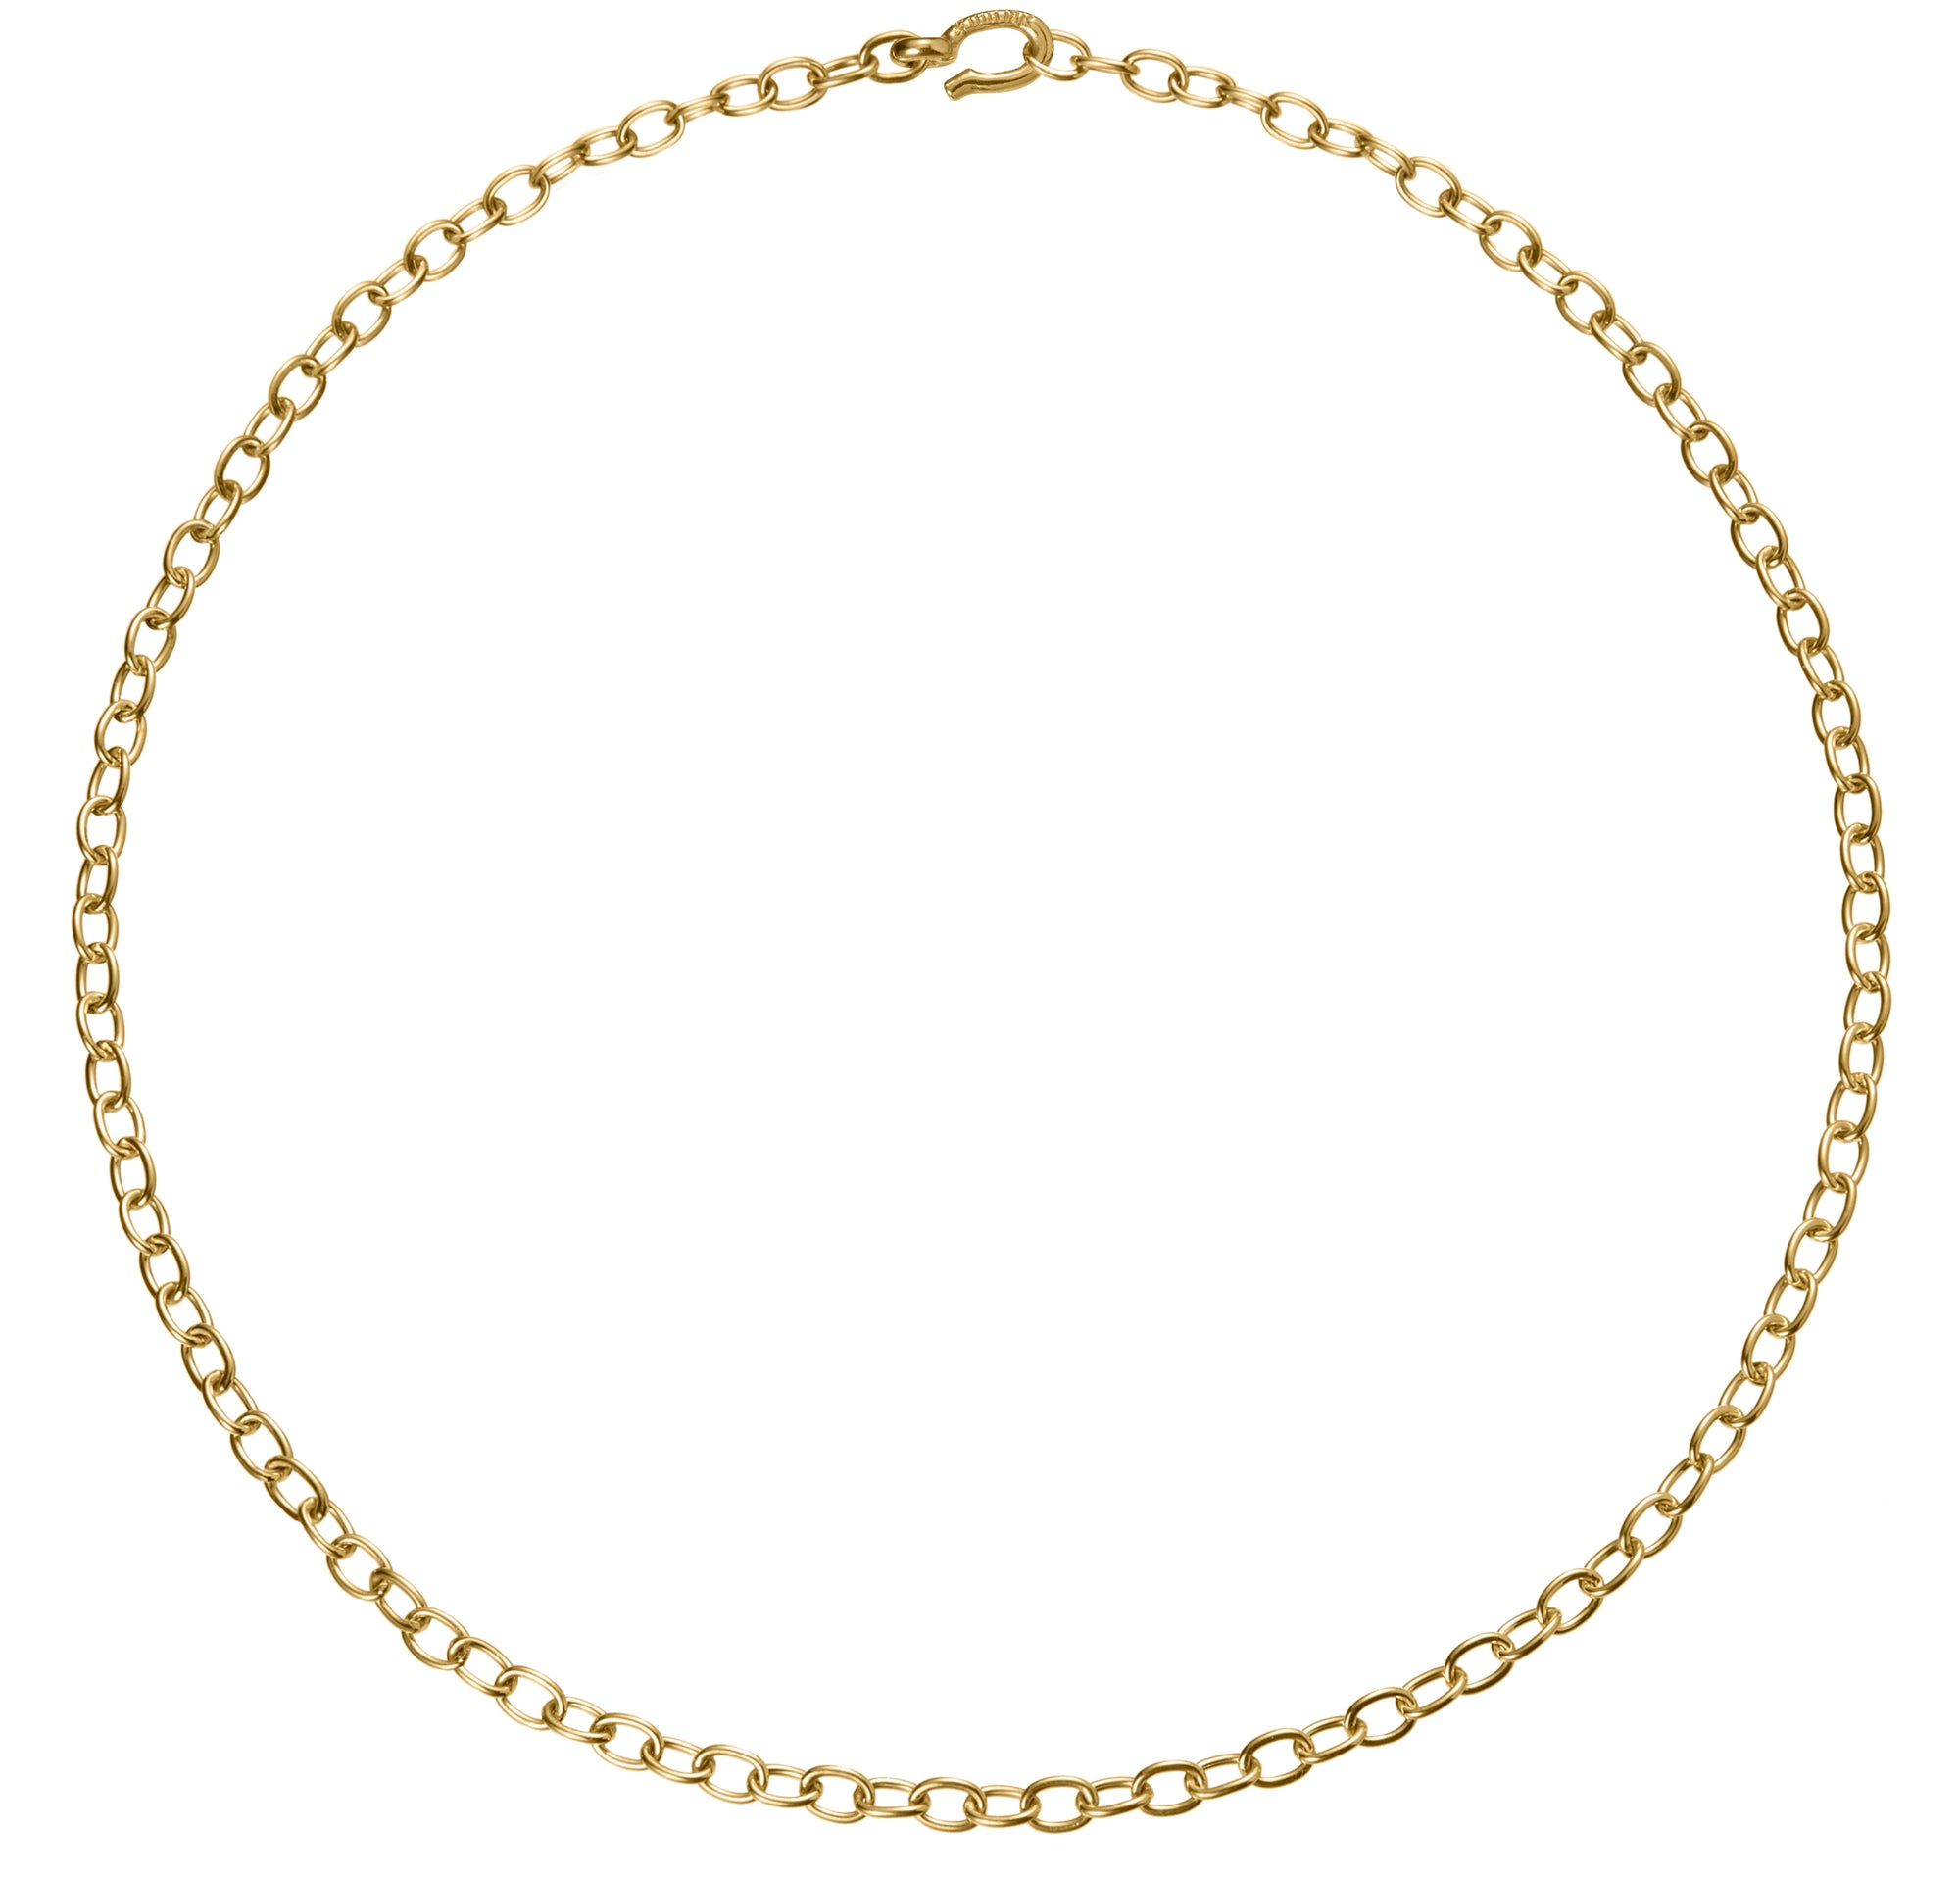 sturdy everyday nautical 18k gold hook and chain necklace by finn by candice pool neistat